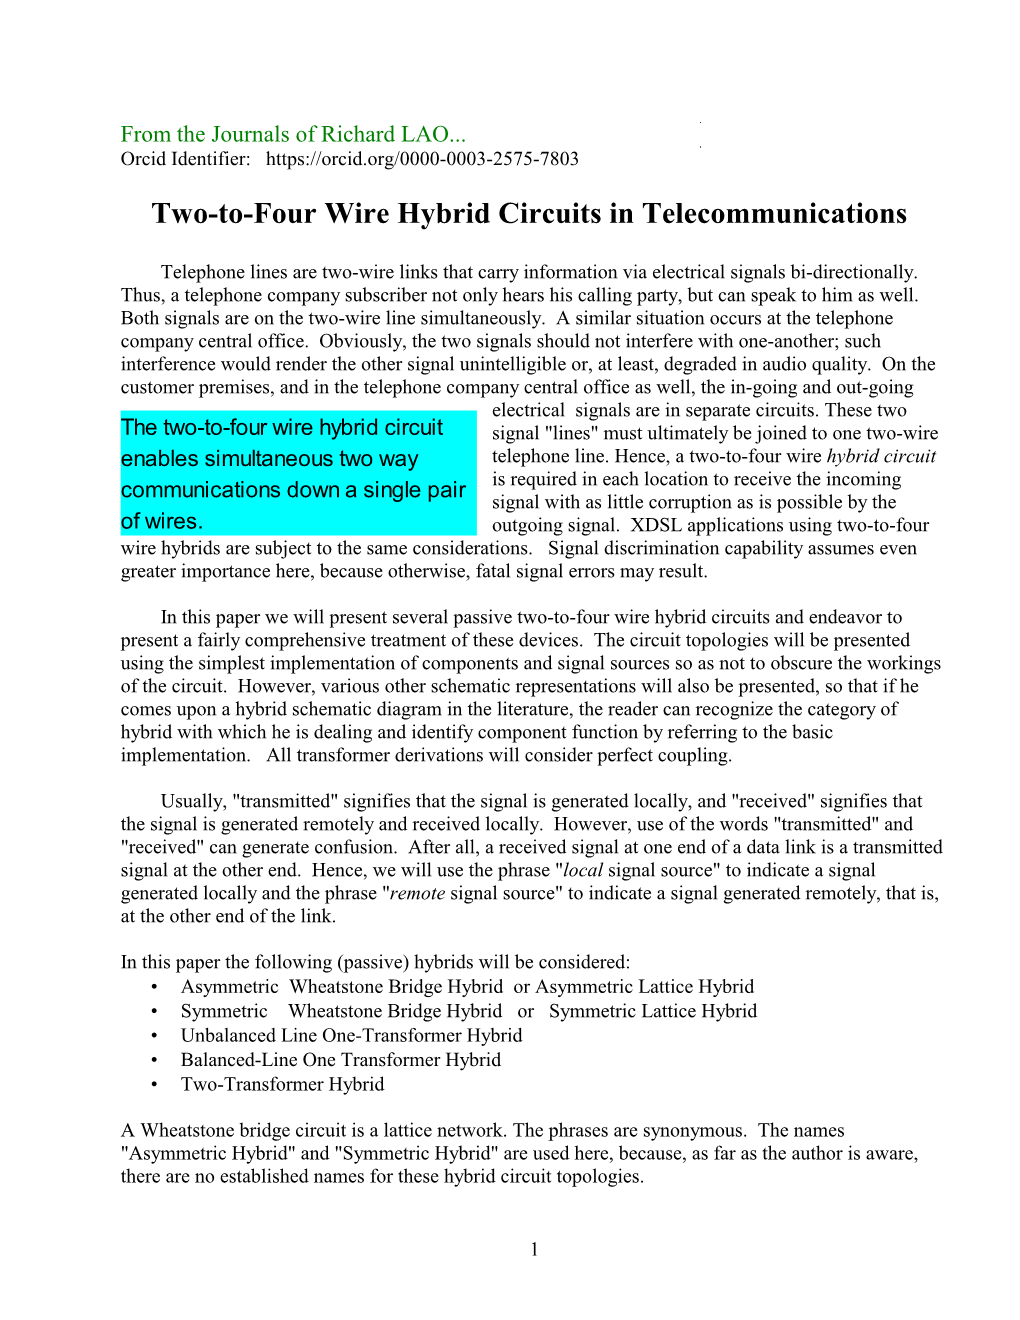 Two-To-Four Wire Hybrid Circuits in Telecommunications